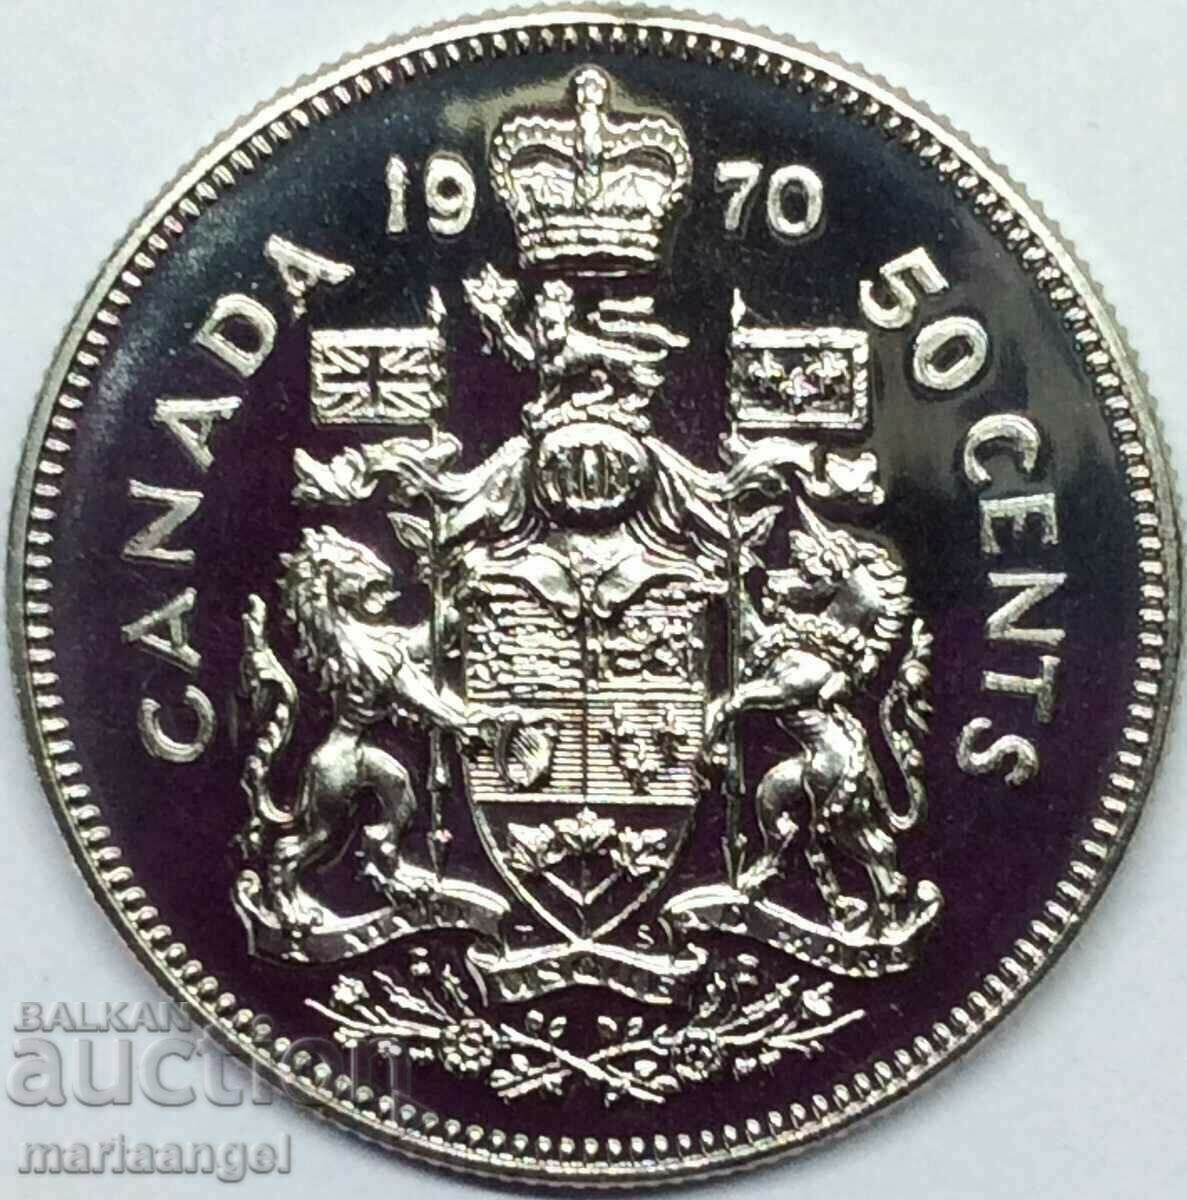 Canada 50 cents 1970 UNC PROOF